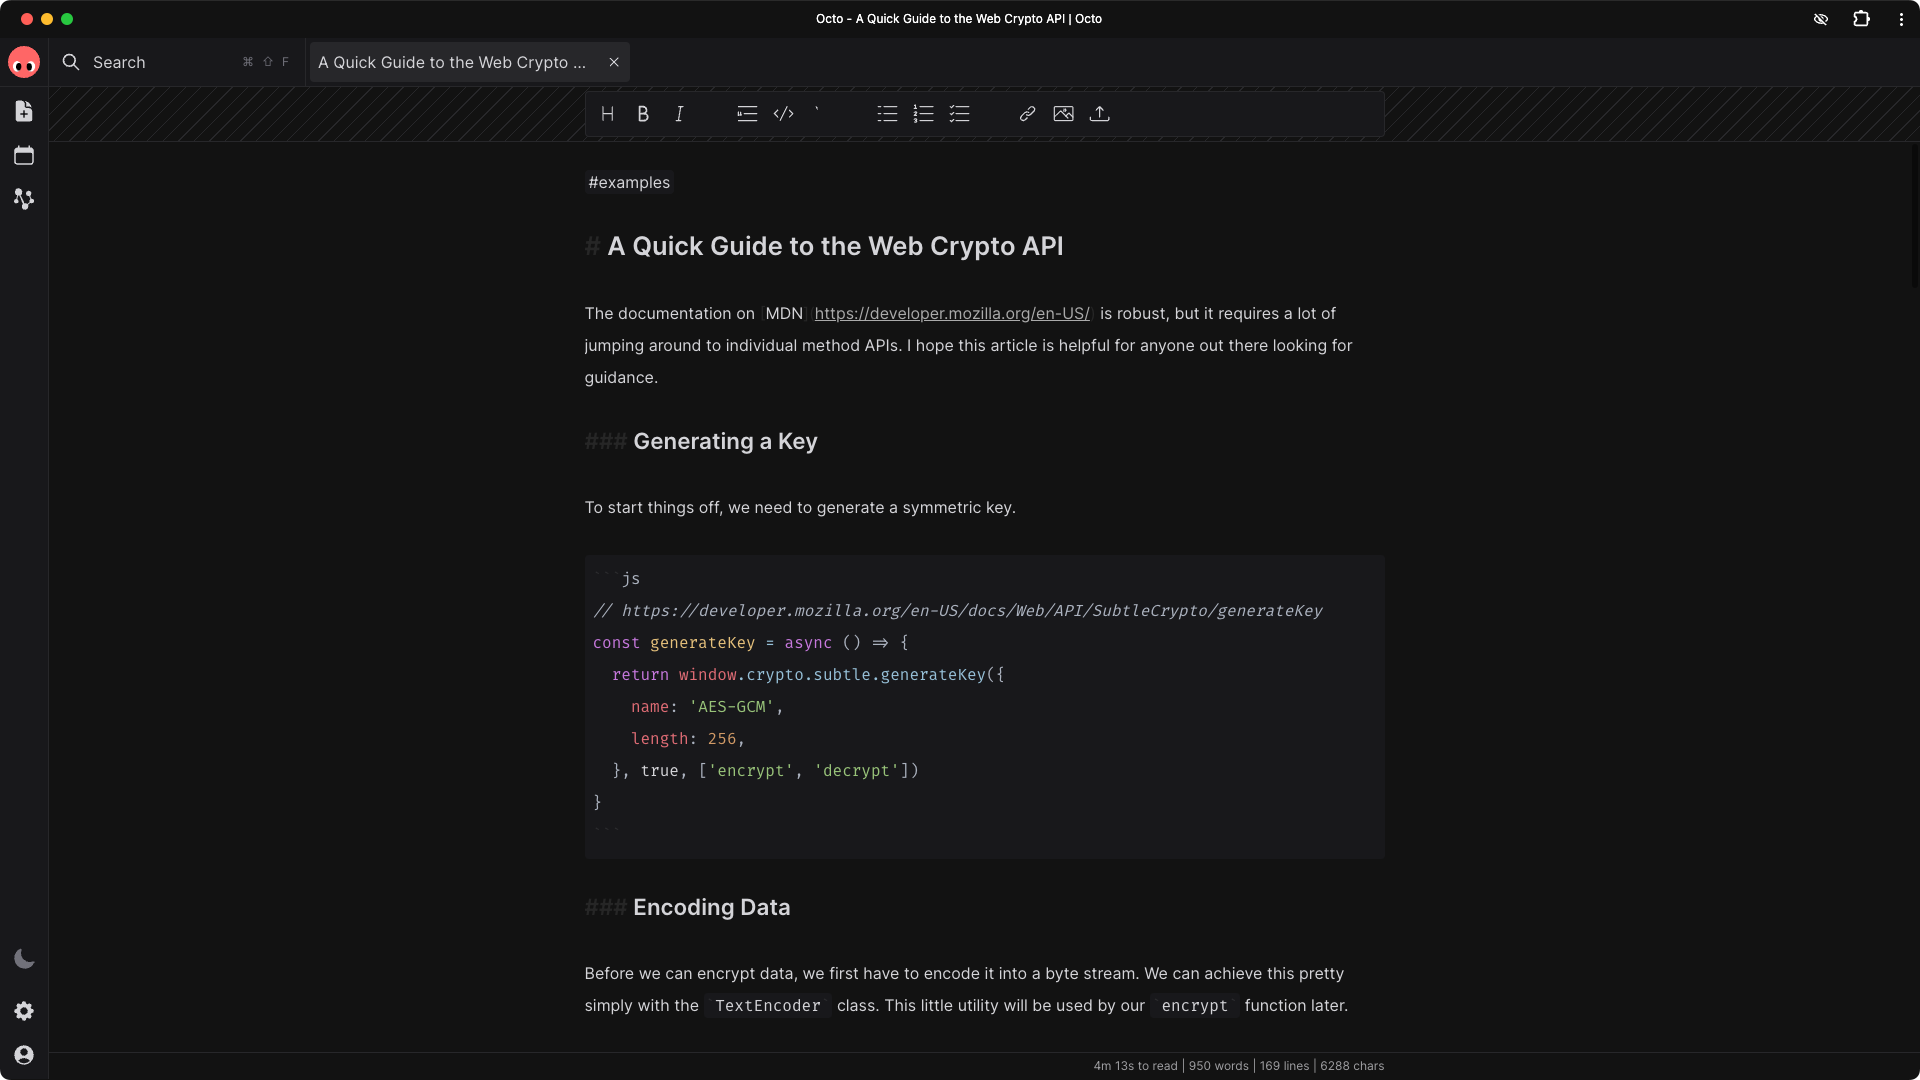 Shows the Octo app with an open tab containing a markdown document.